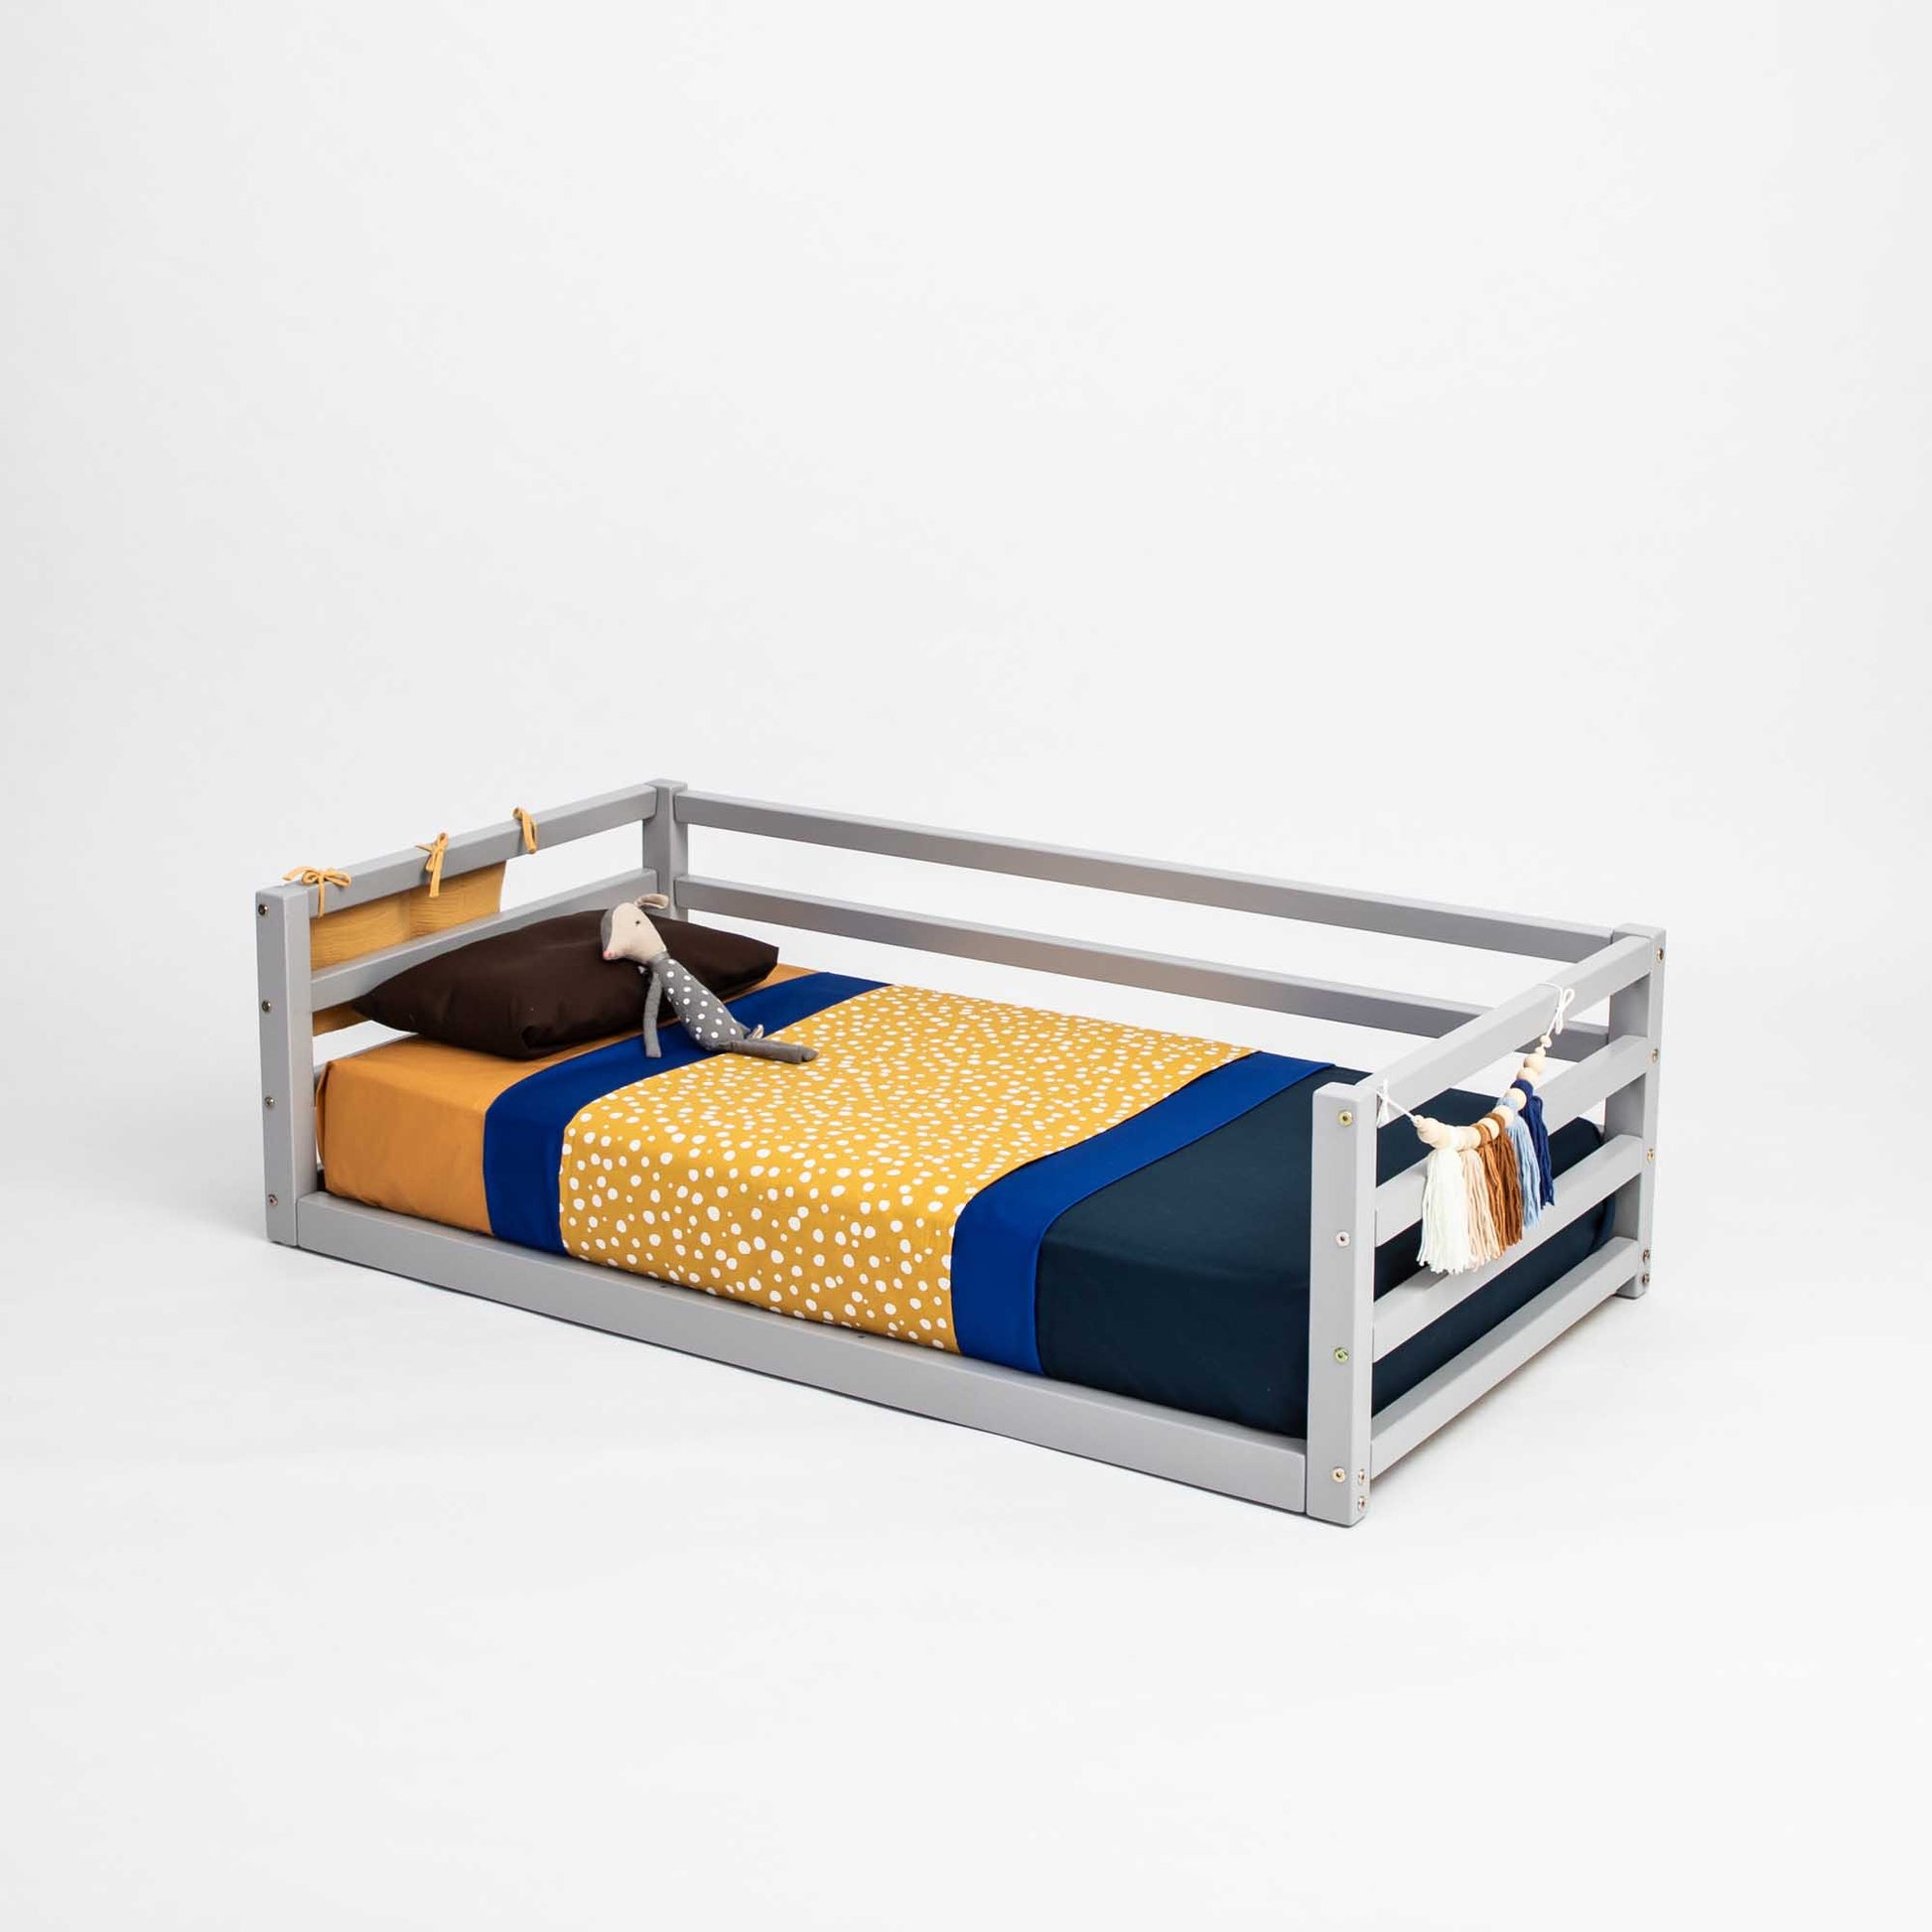 A child's bed with a teddy bear on it, featuring a 2-in-1 transformable design from Sweet Home From Wood.